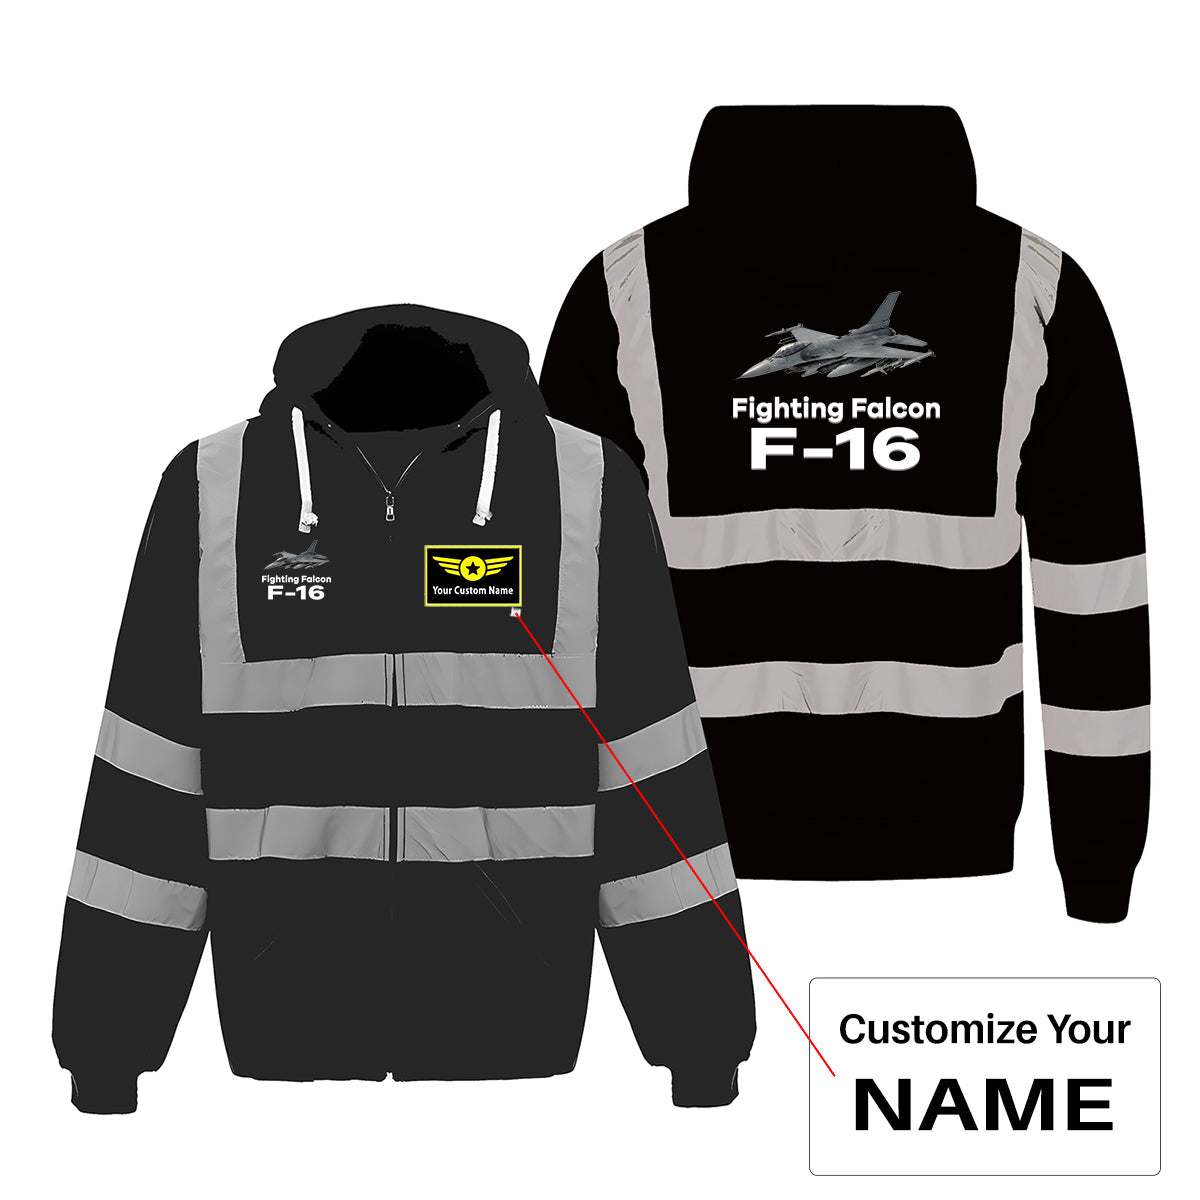 The Fighting Falcon F16 Designed Reflective Zipped Hoodies